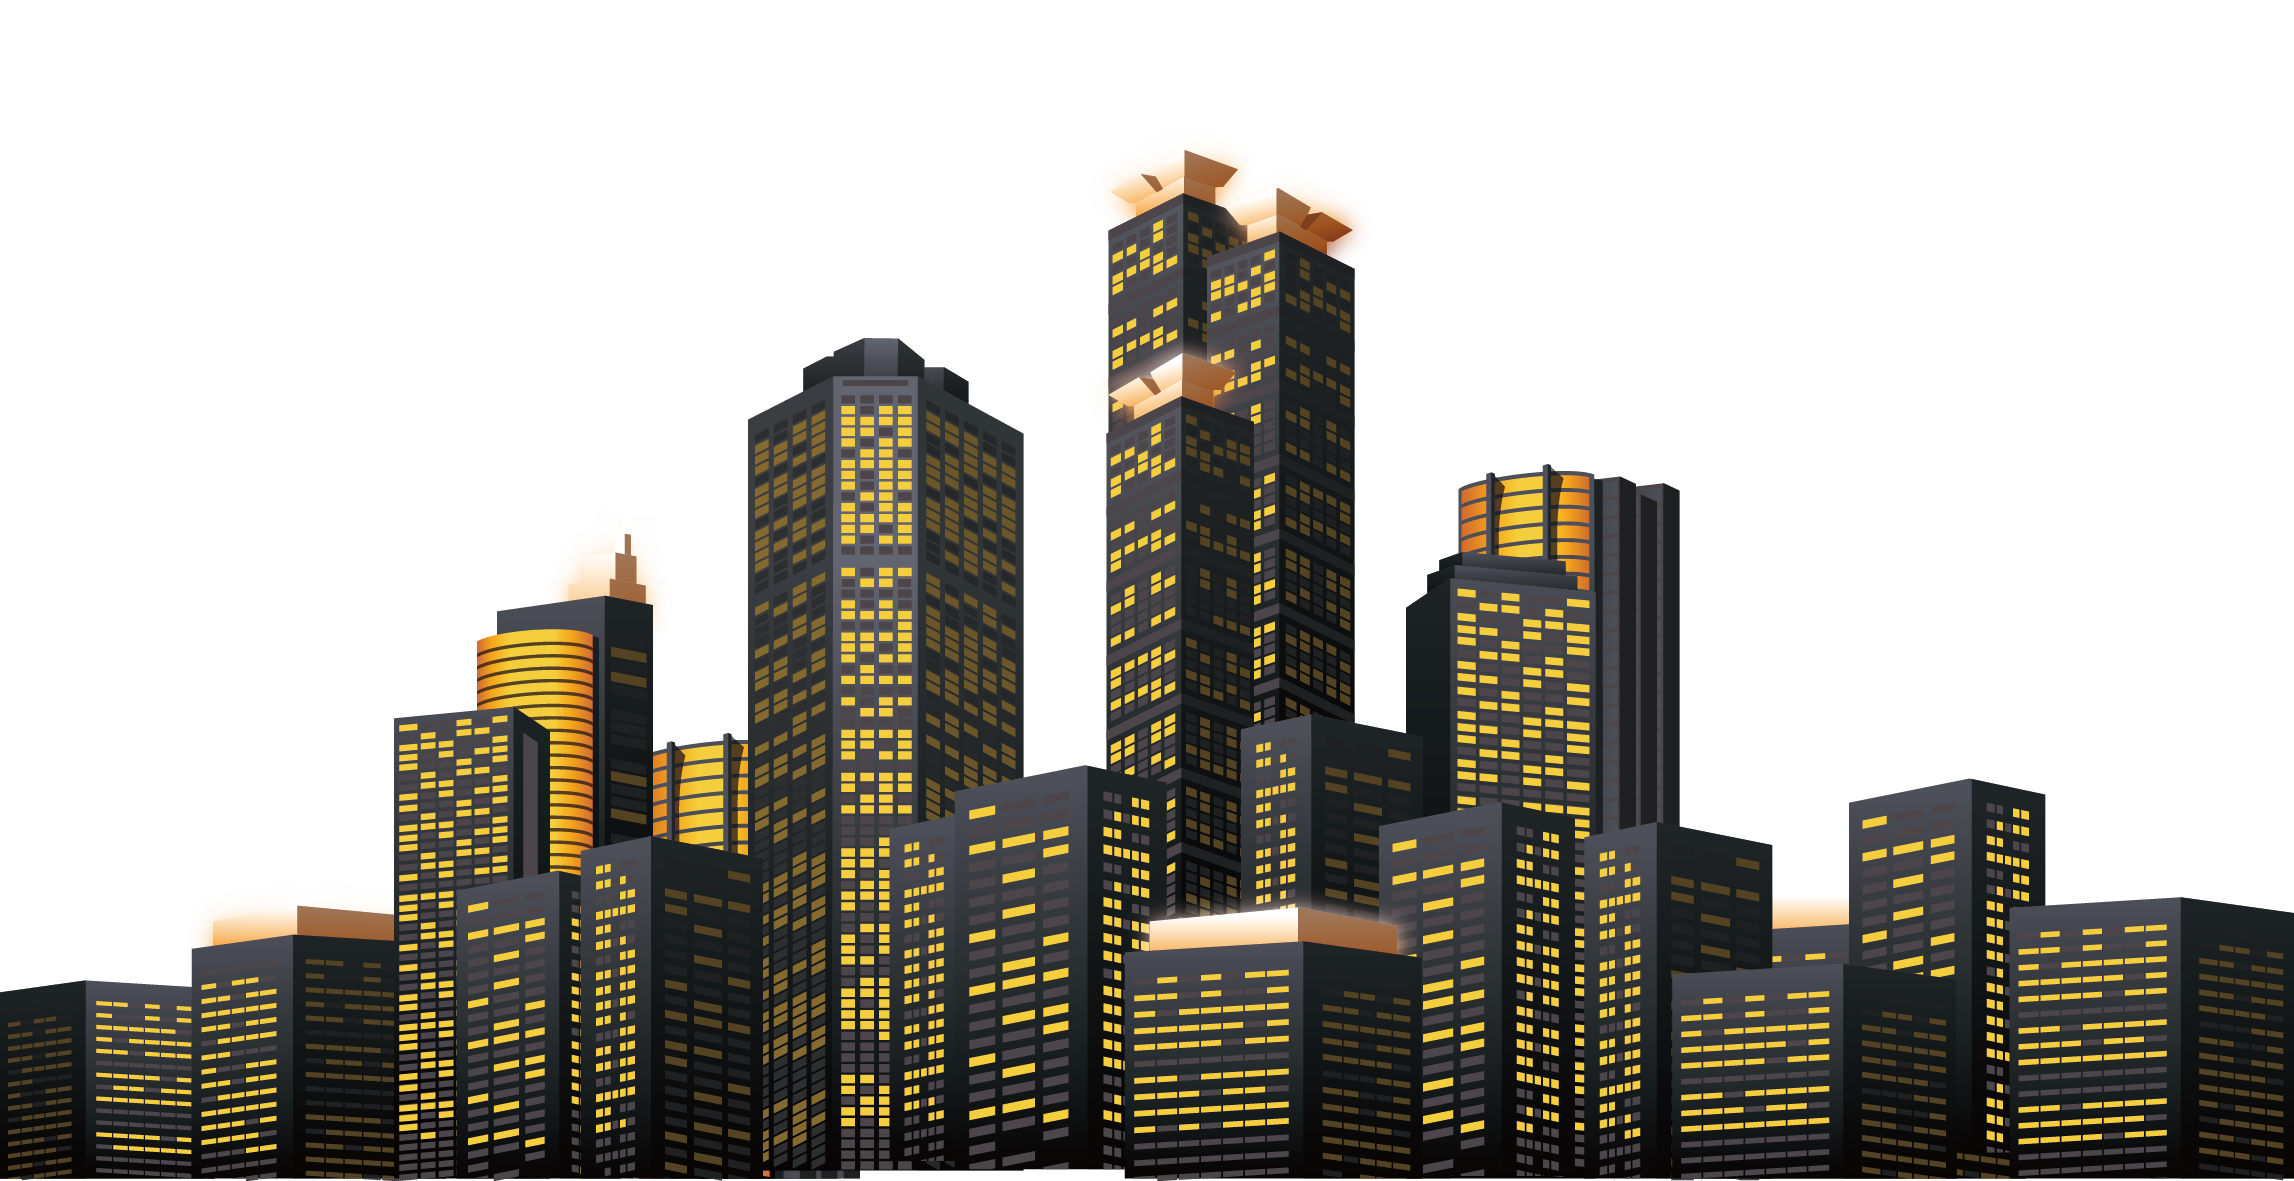 Night Skyline Png : By downloading city at night skyline transparent ...